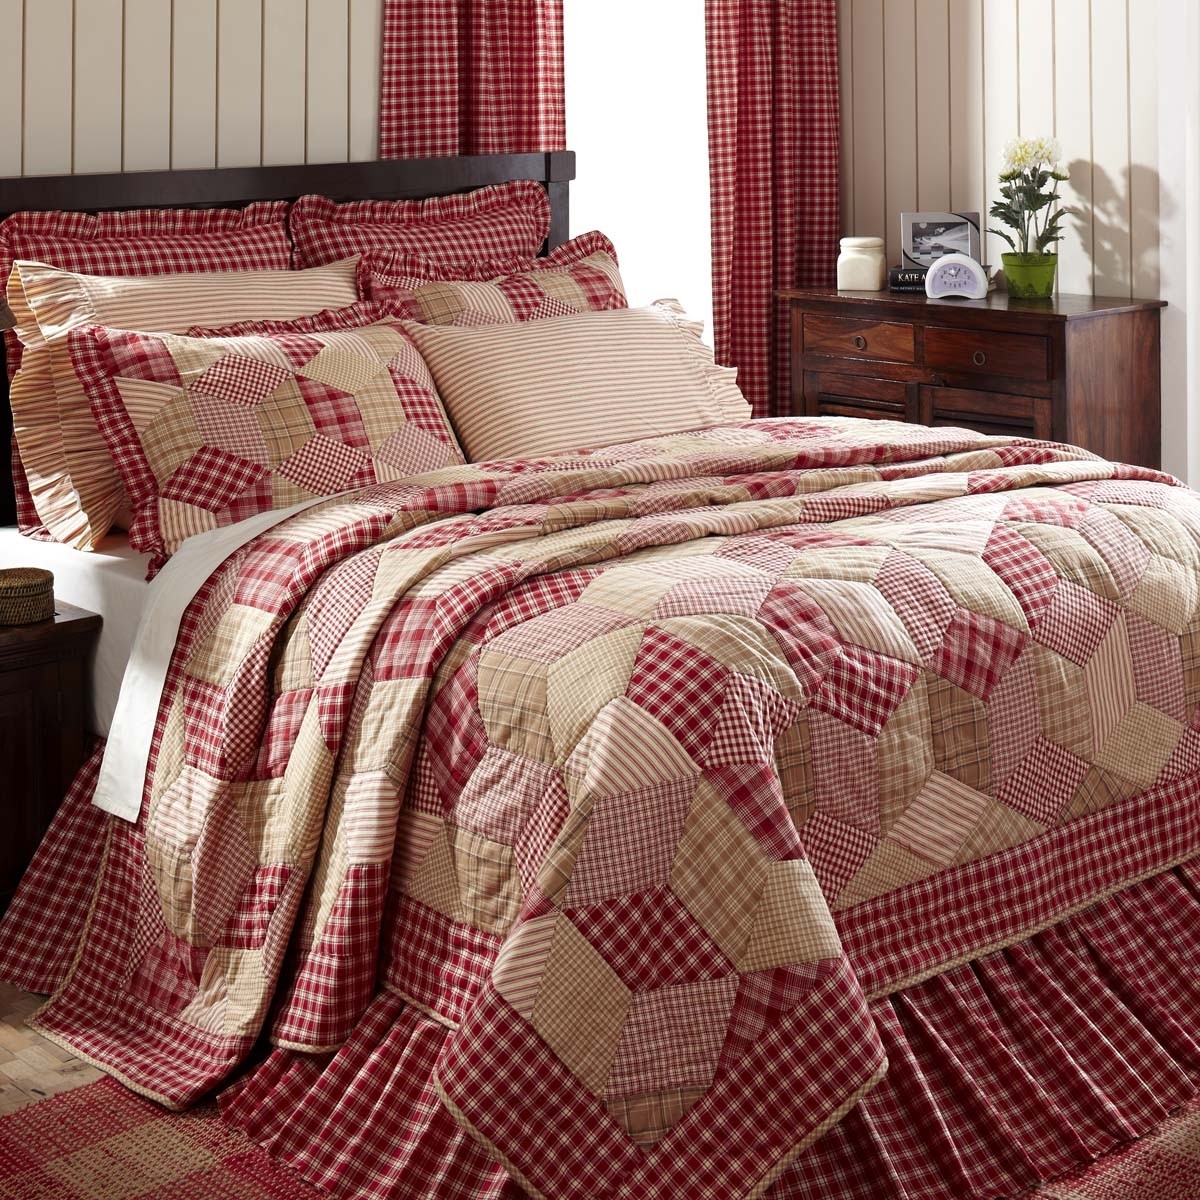 Patchwork quilt bedding set this beautiful french country bedding set